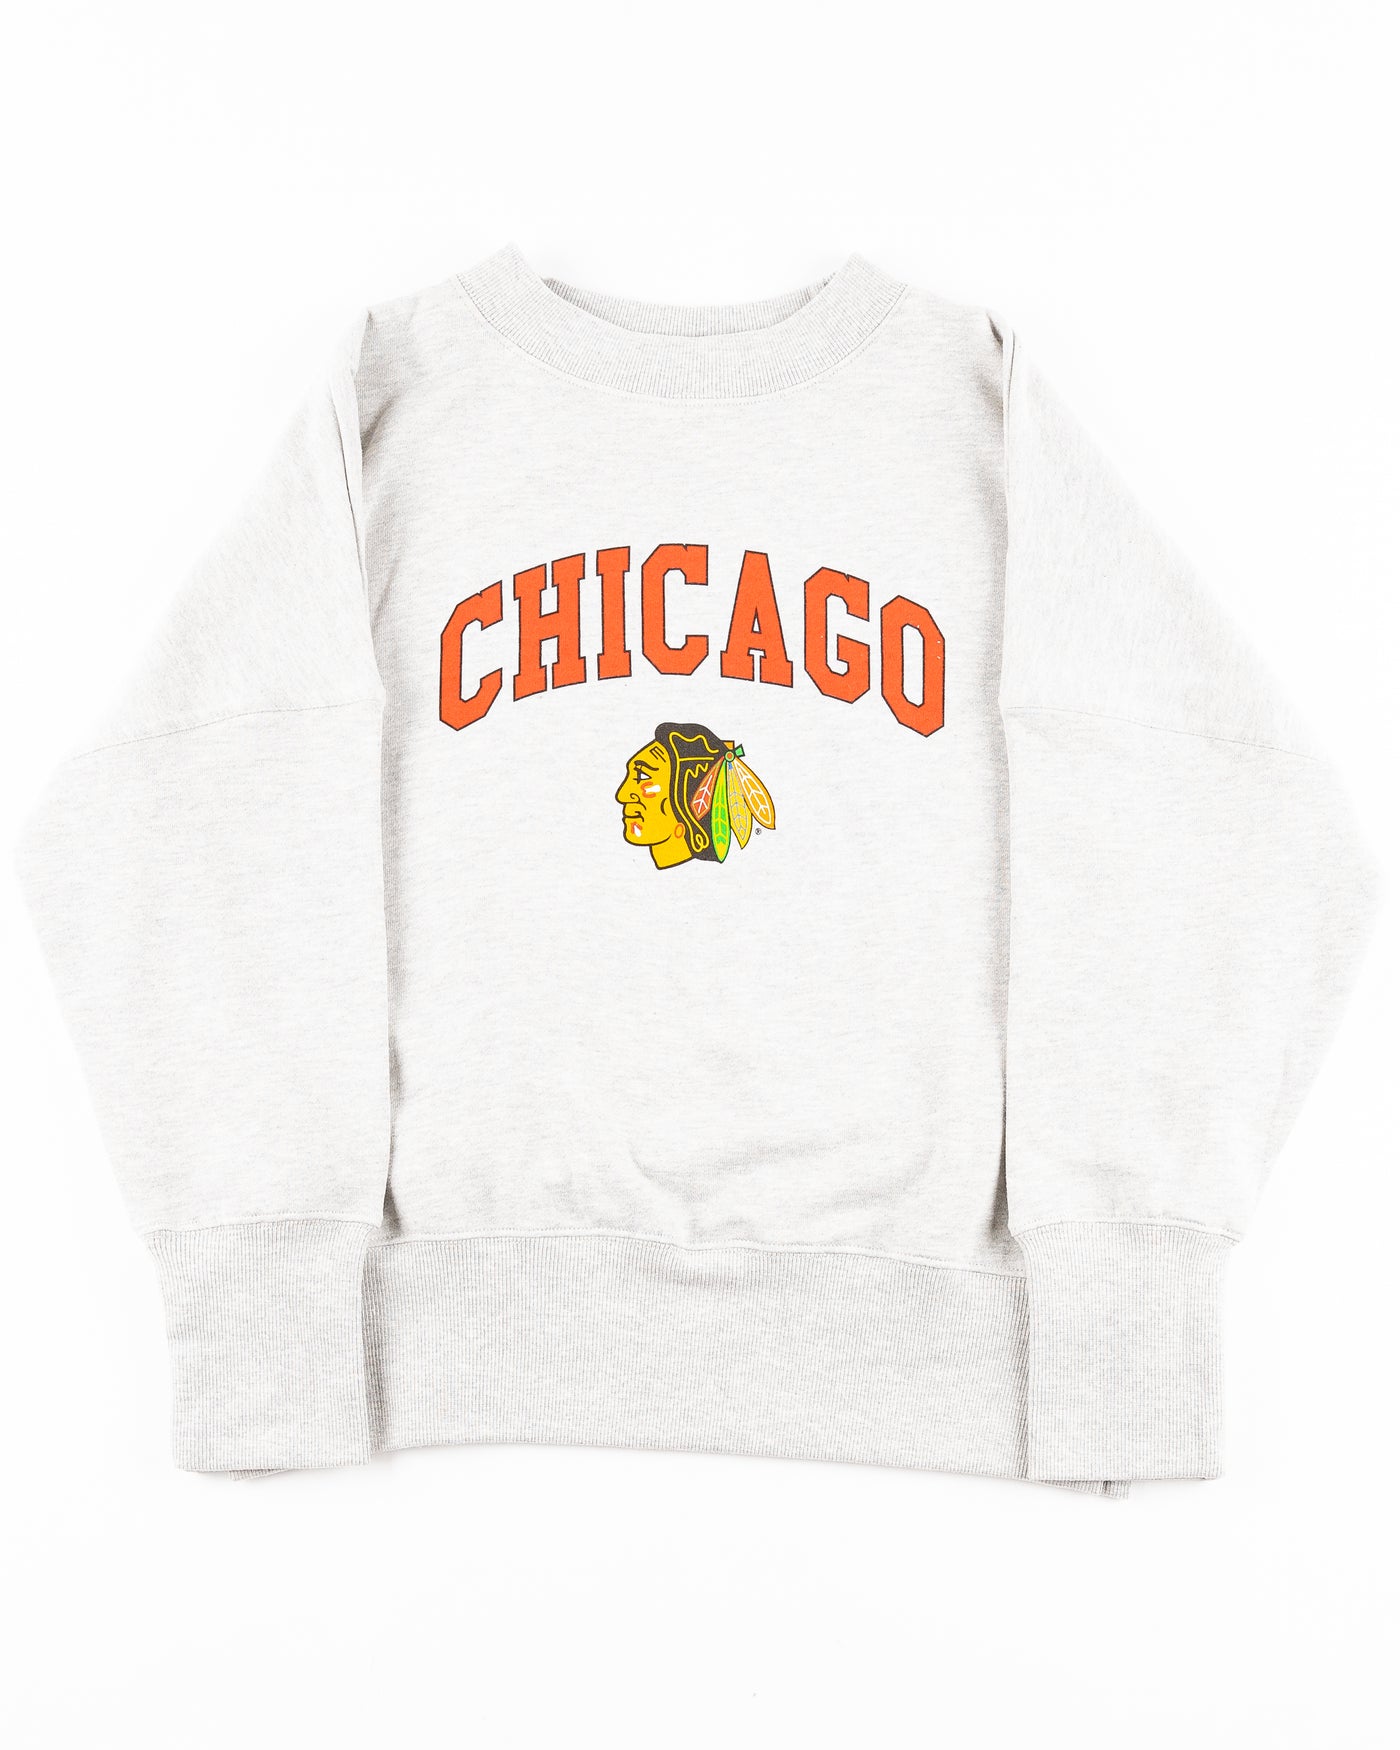 grey chicka-d crewneck with Chicago wordmark and Chicago Blackhawks primary logo across front - front lay flat